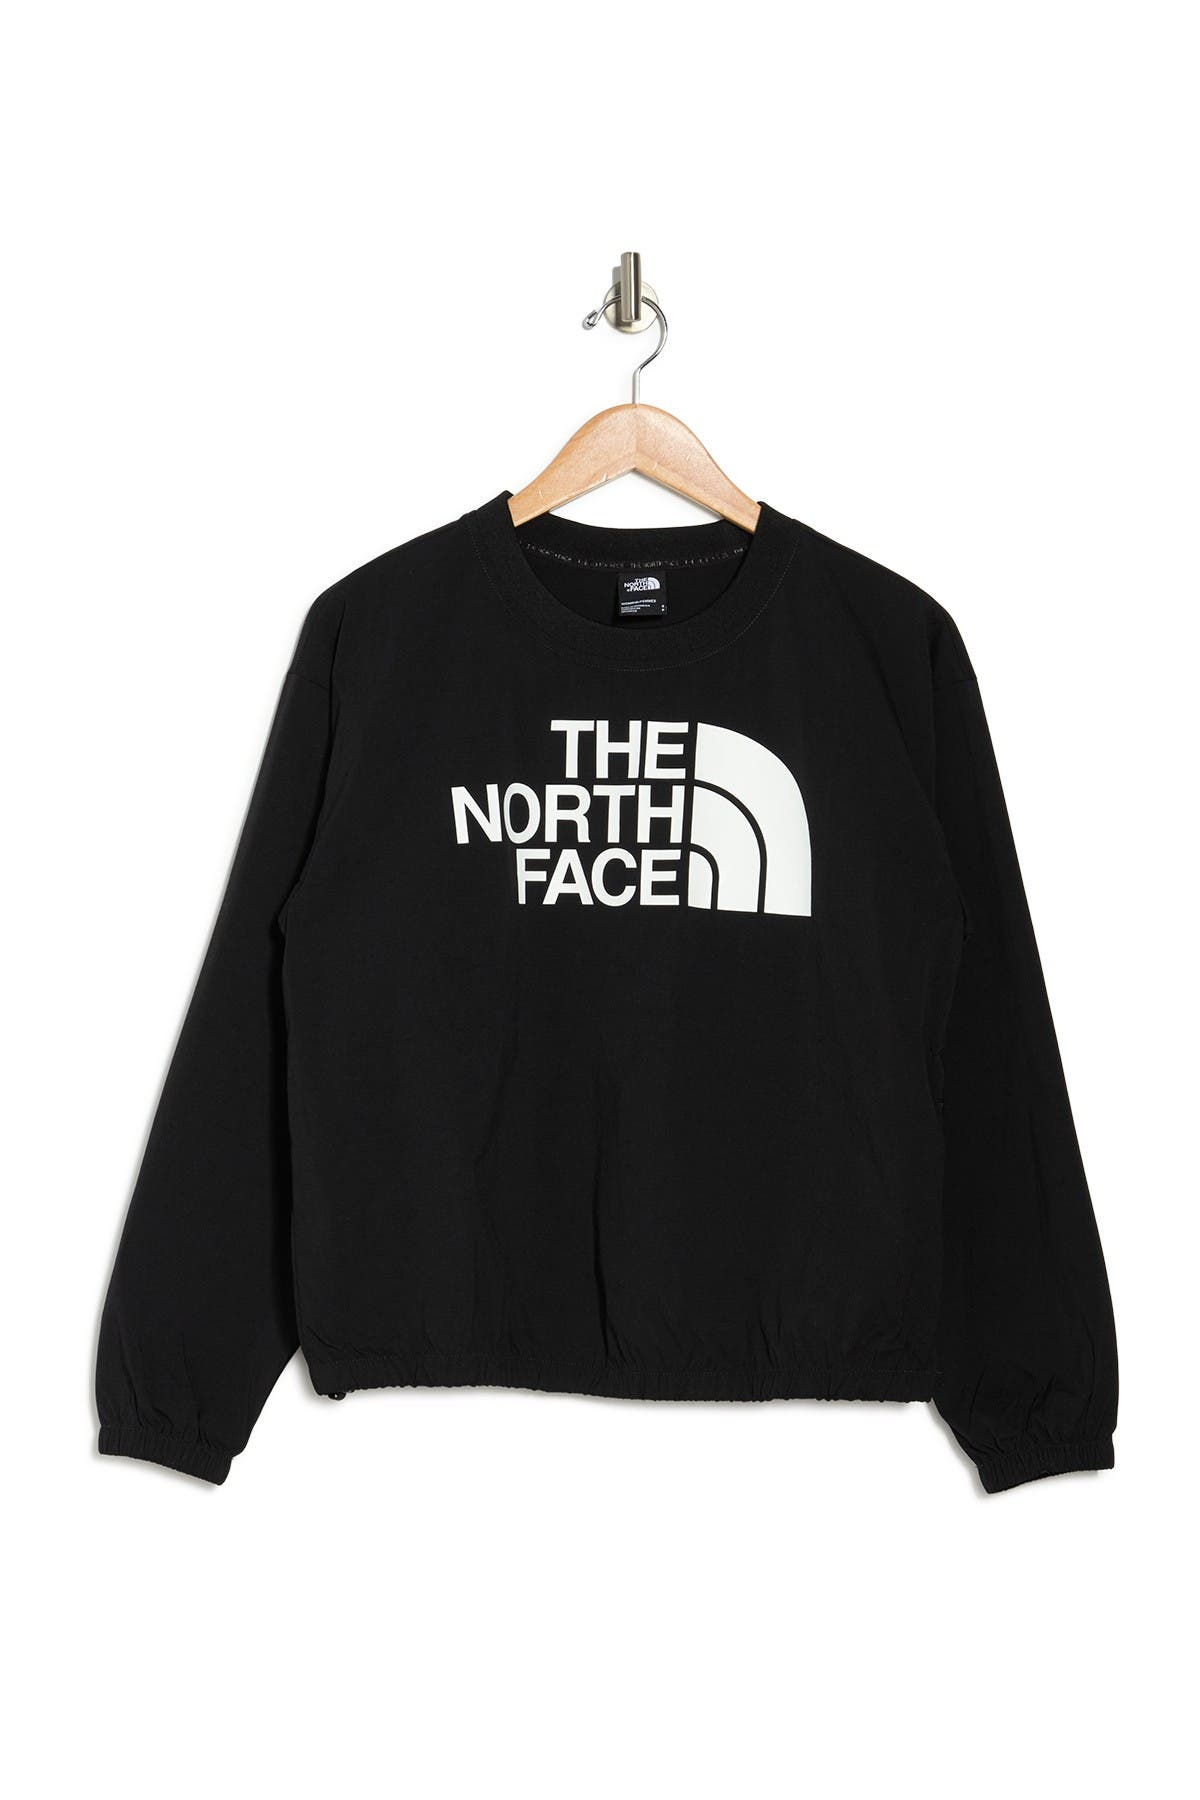 north face blouse